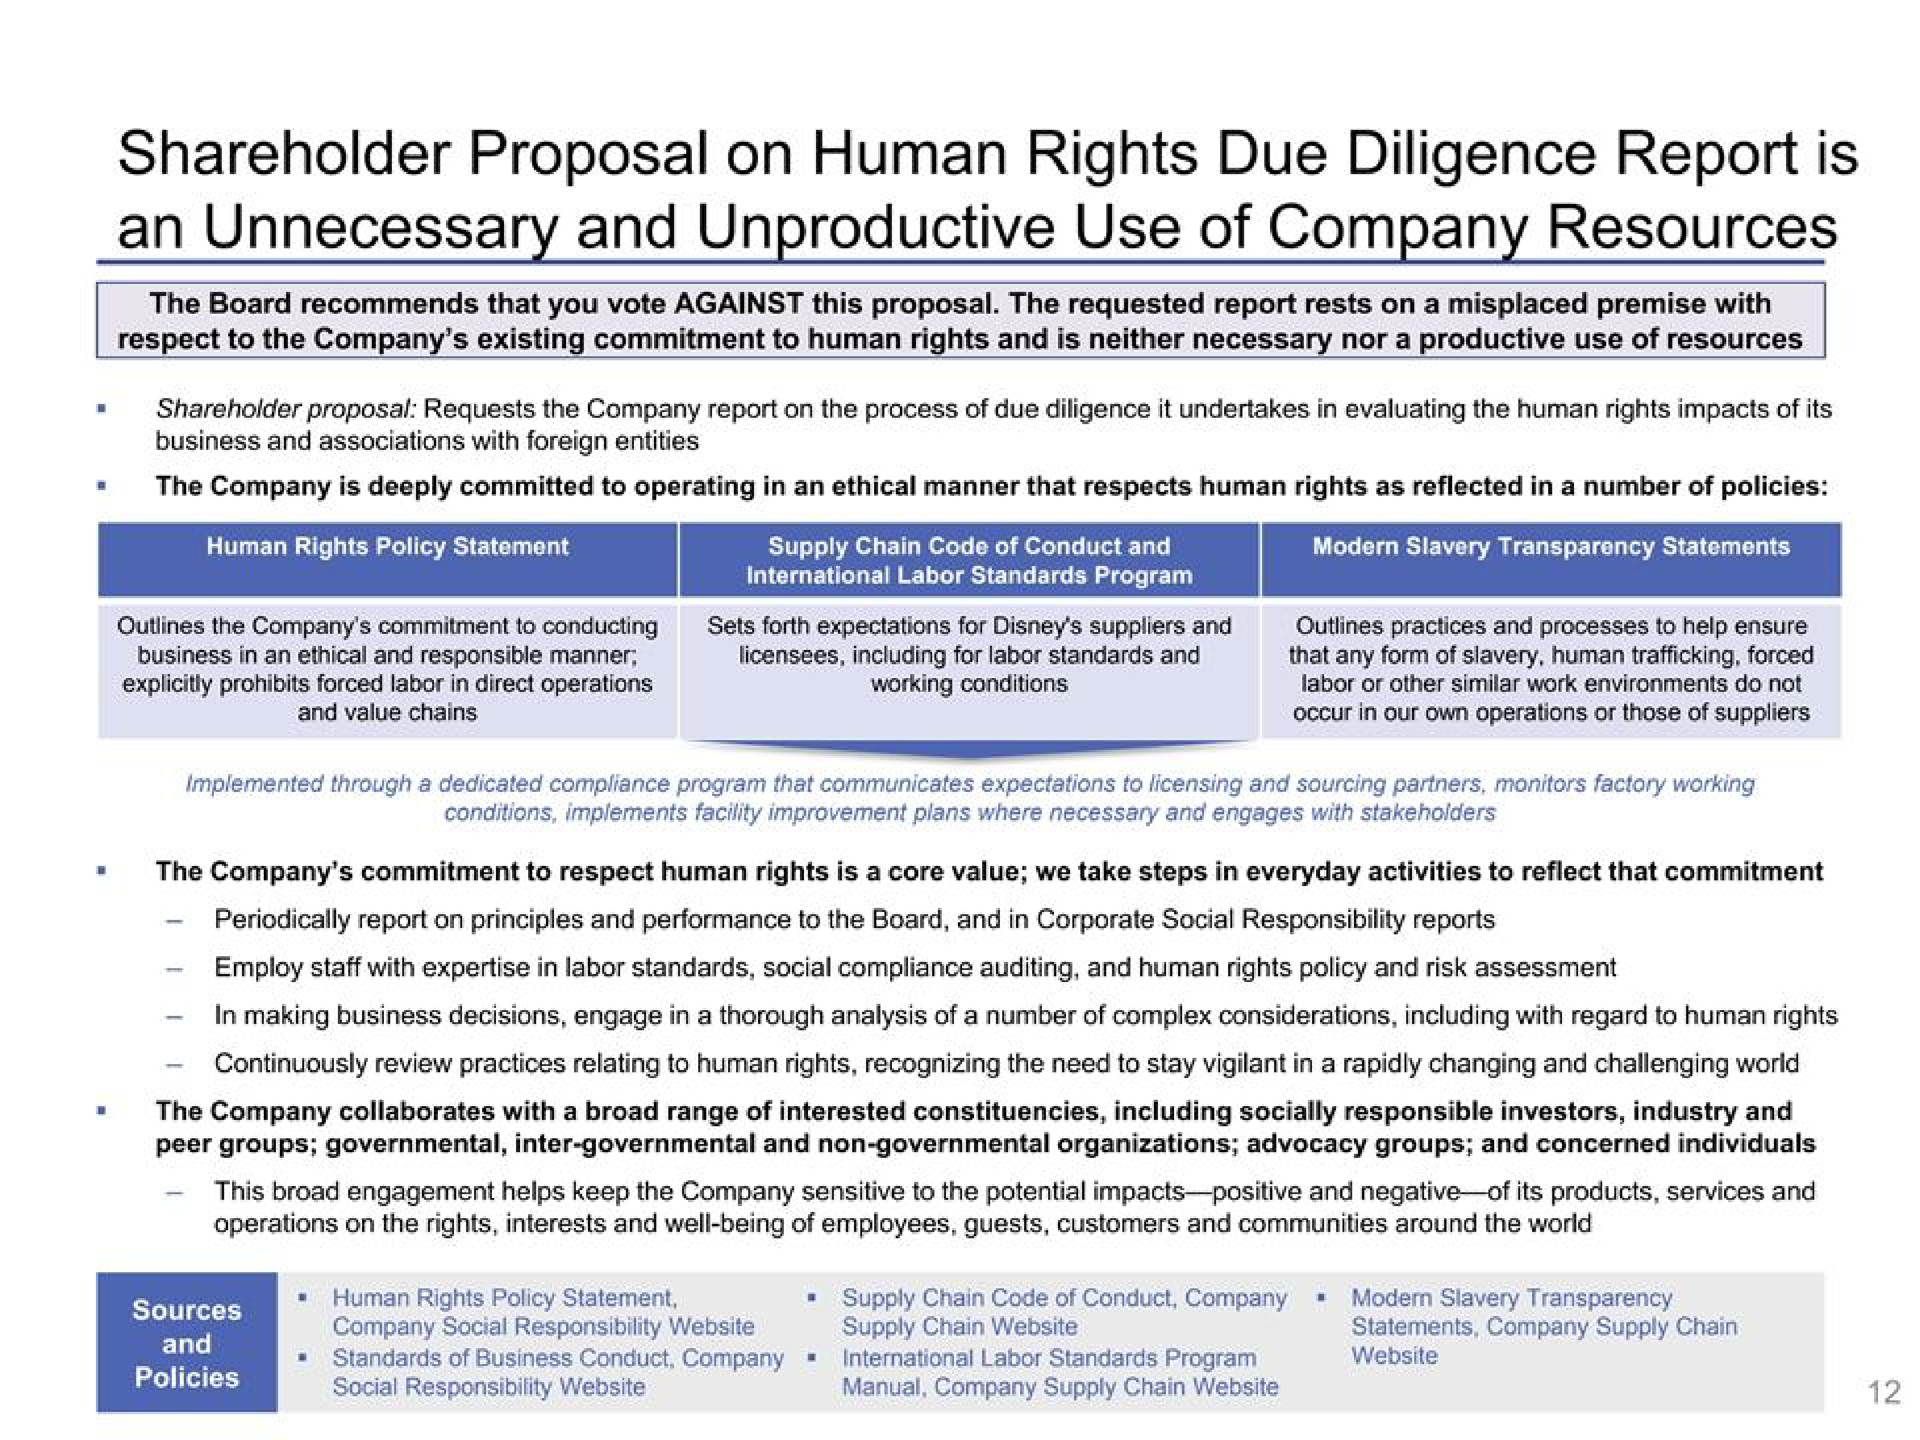 shareholder proposal on human rights due diligence report is an unnecessary and unproductive use of company resources | Disney